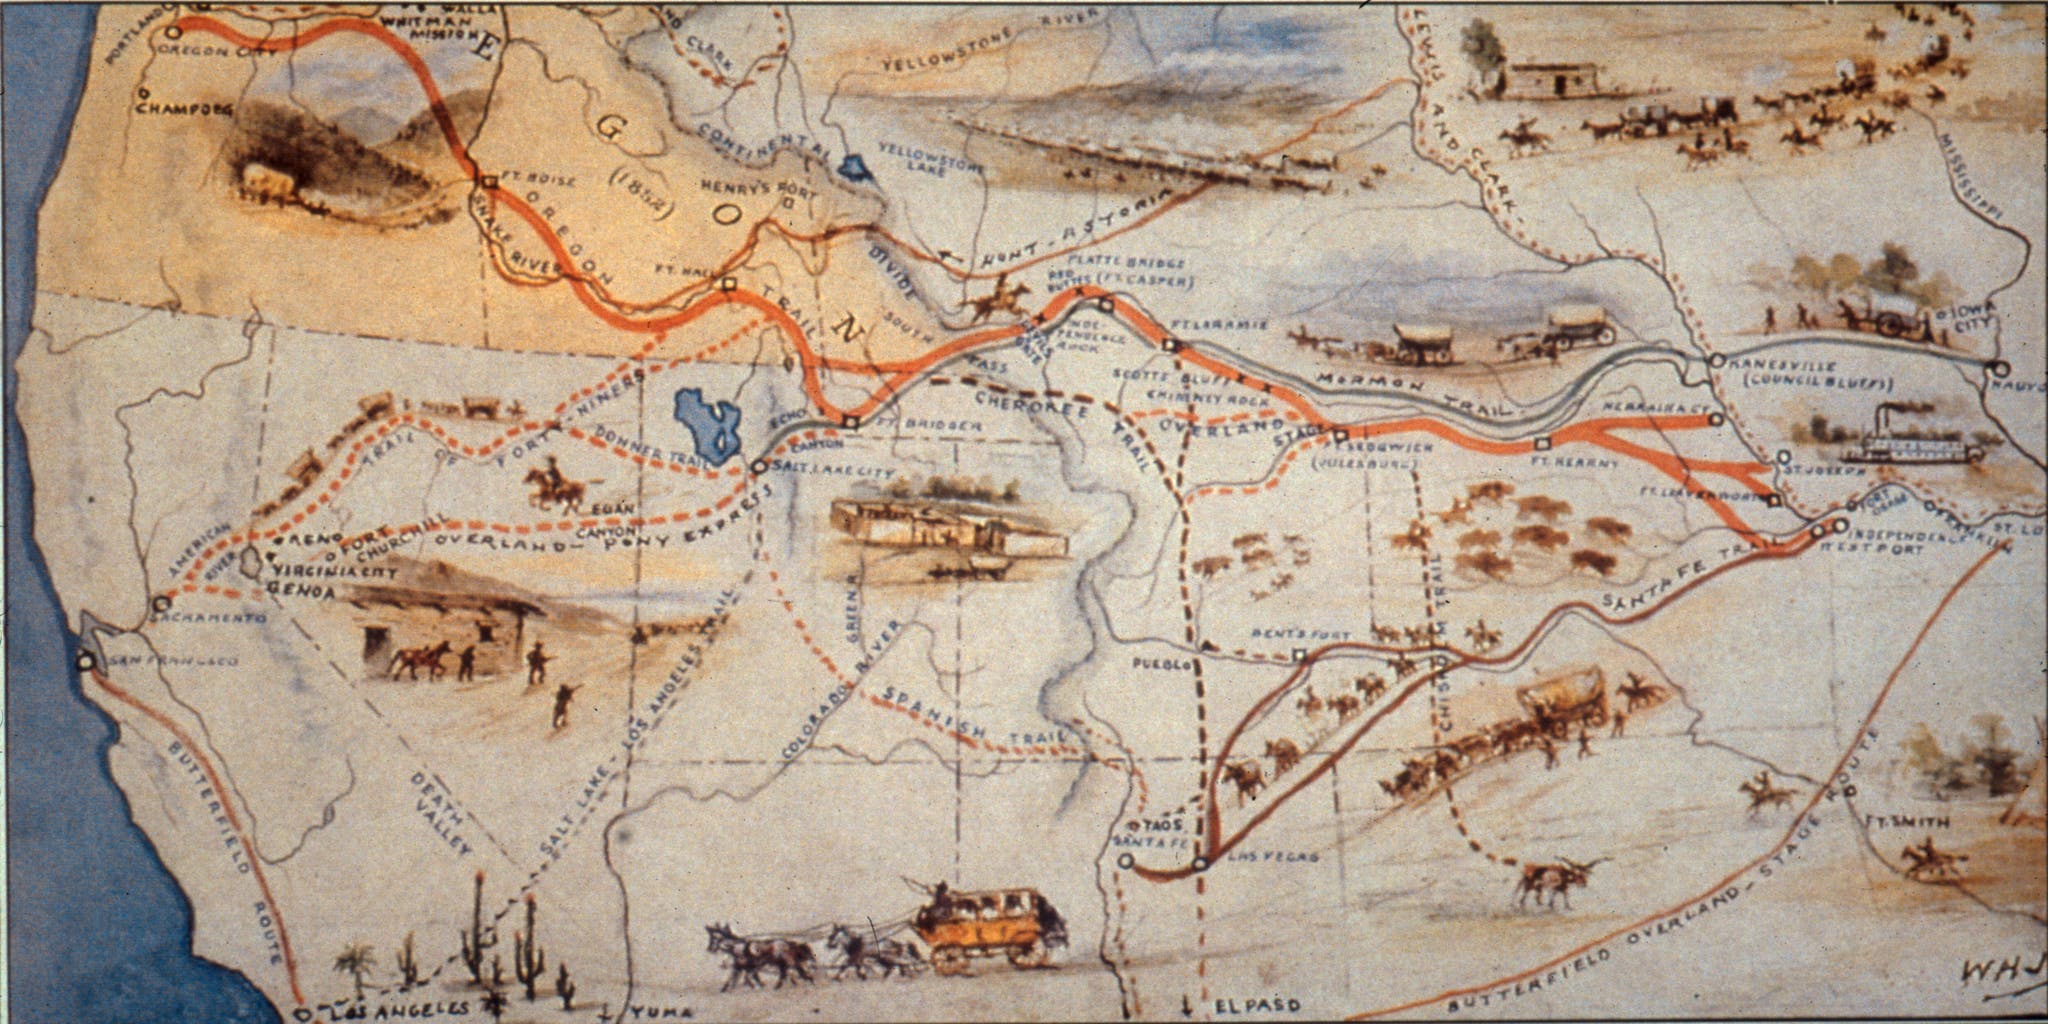 A map showing the westward trail from Missouri to Oregon.